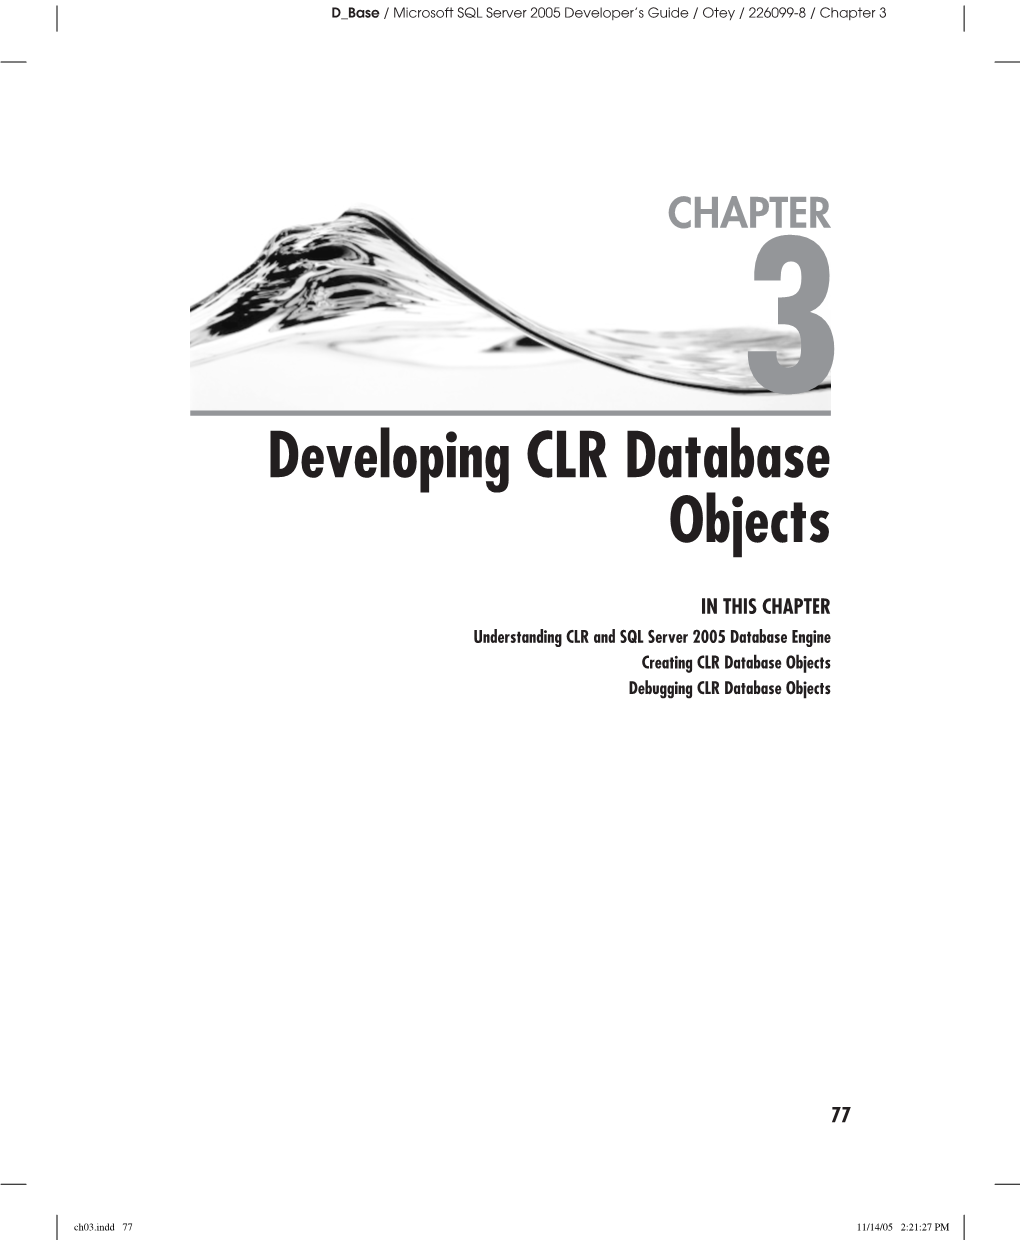 Developing CLR Database Objects